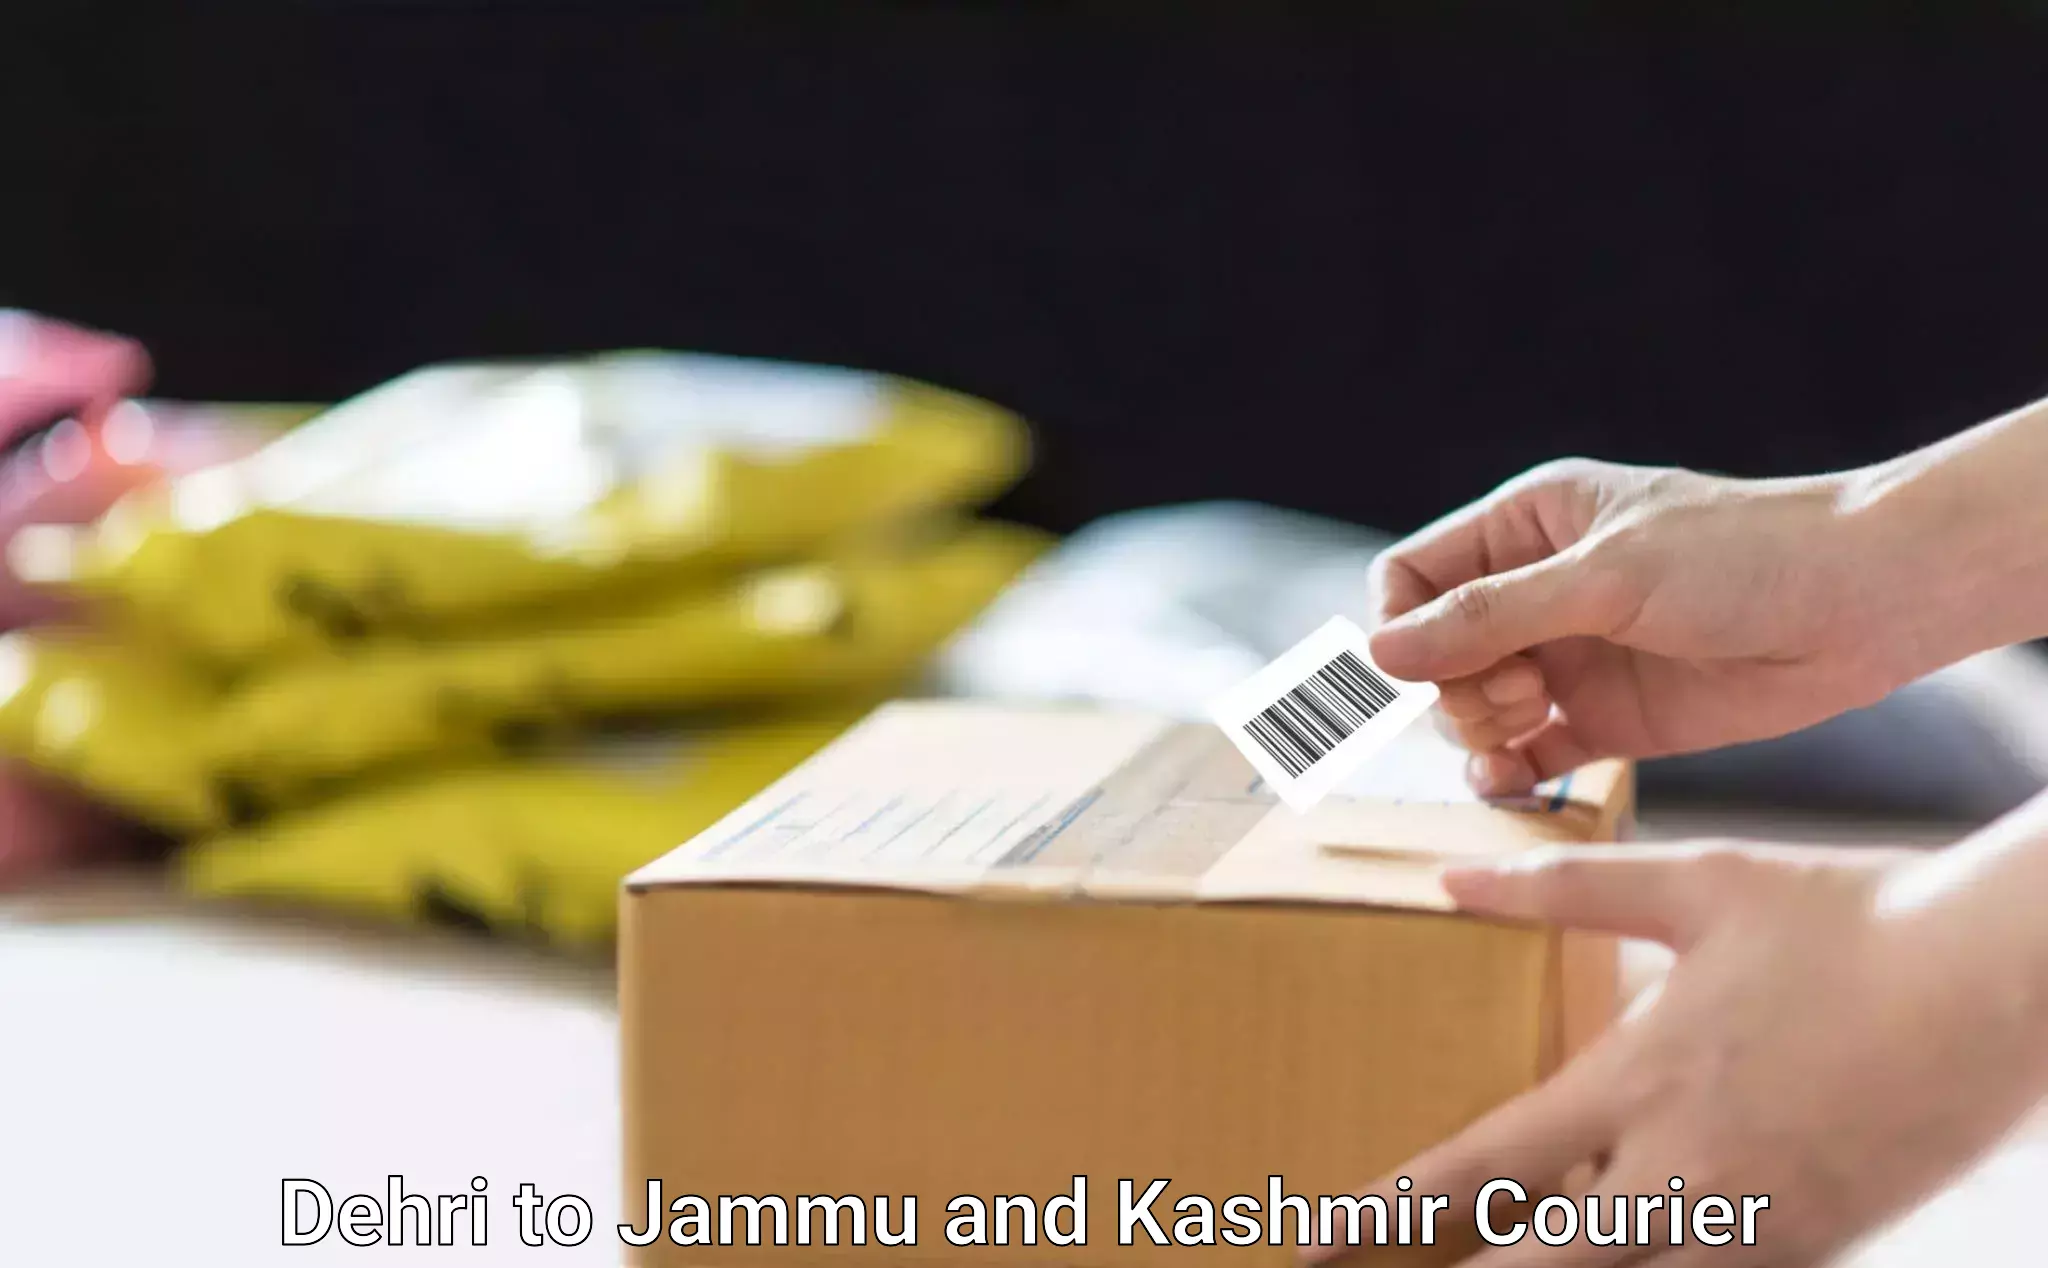 Furniture moving experts in Dehri to Jammu and Kashmir